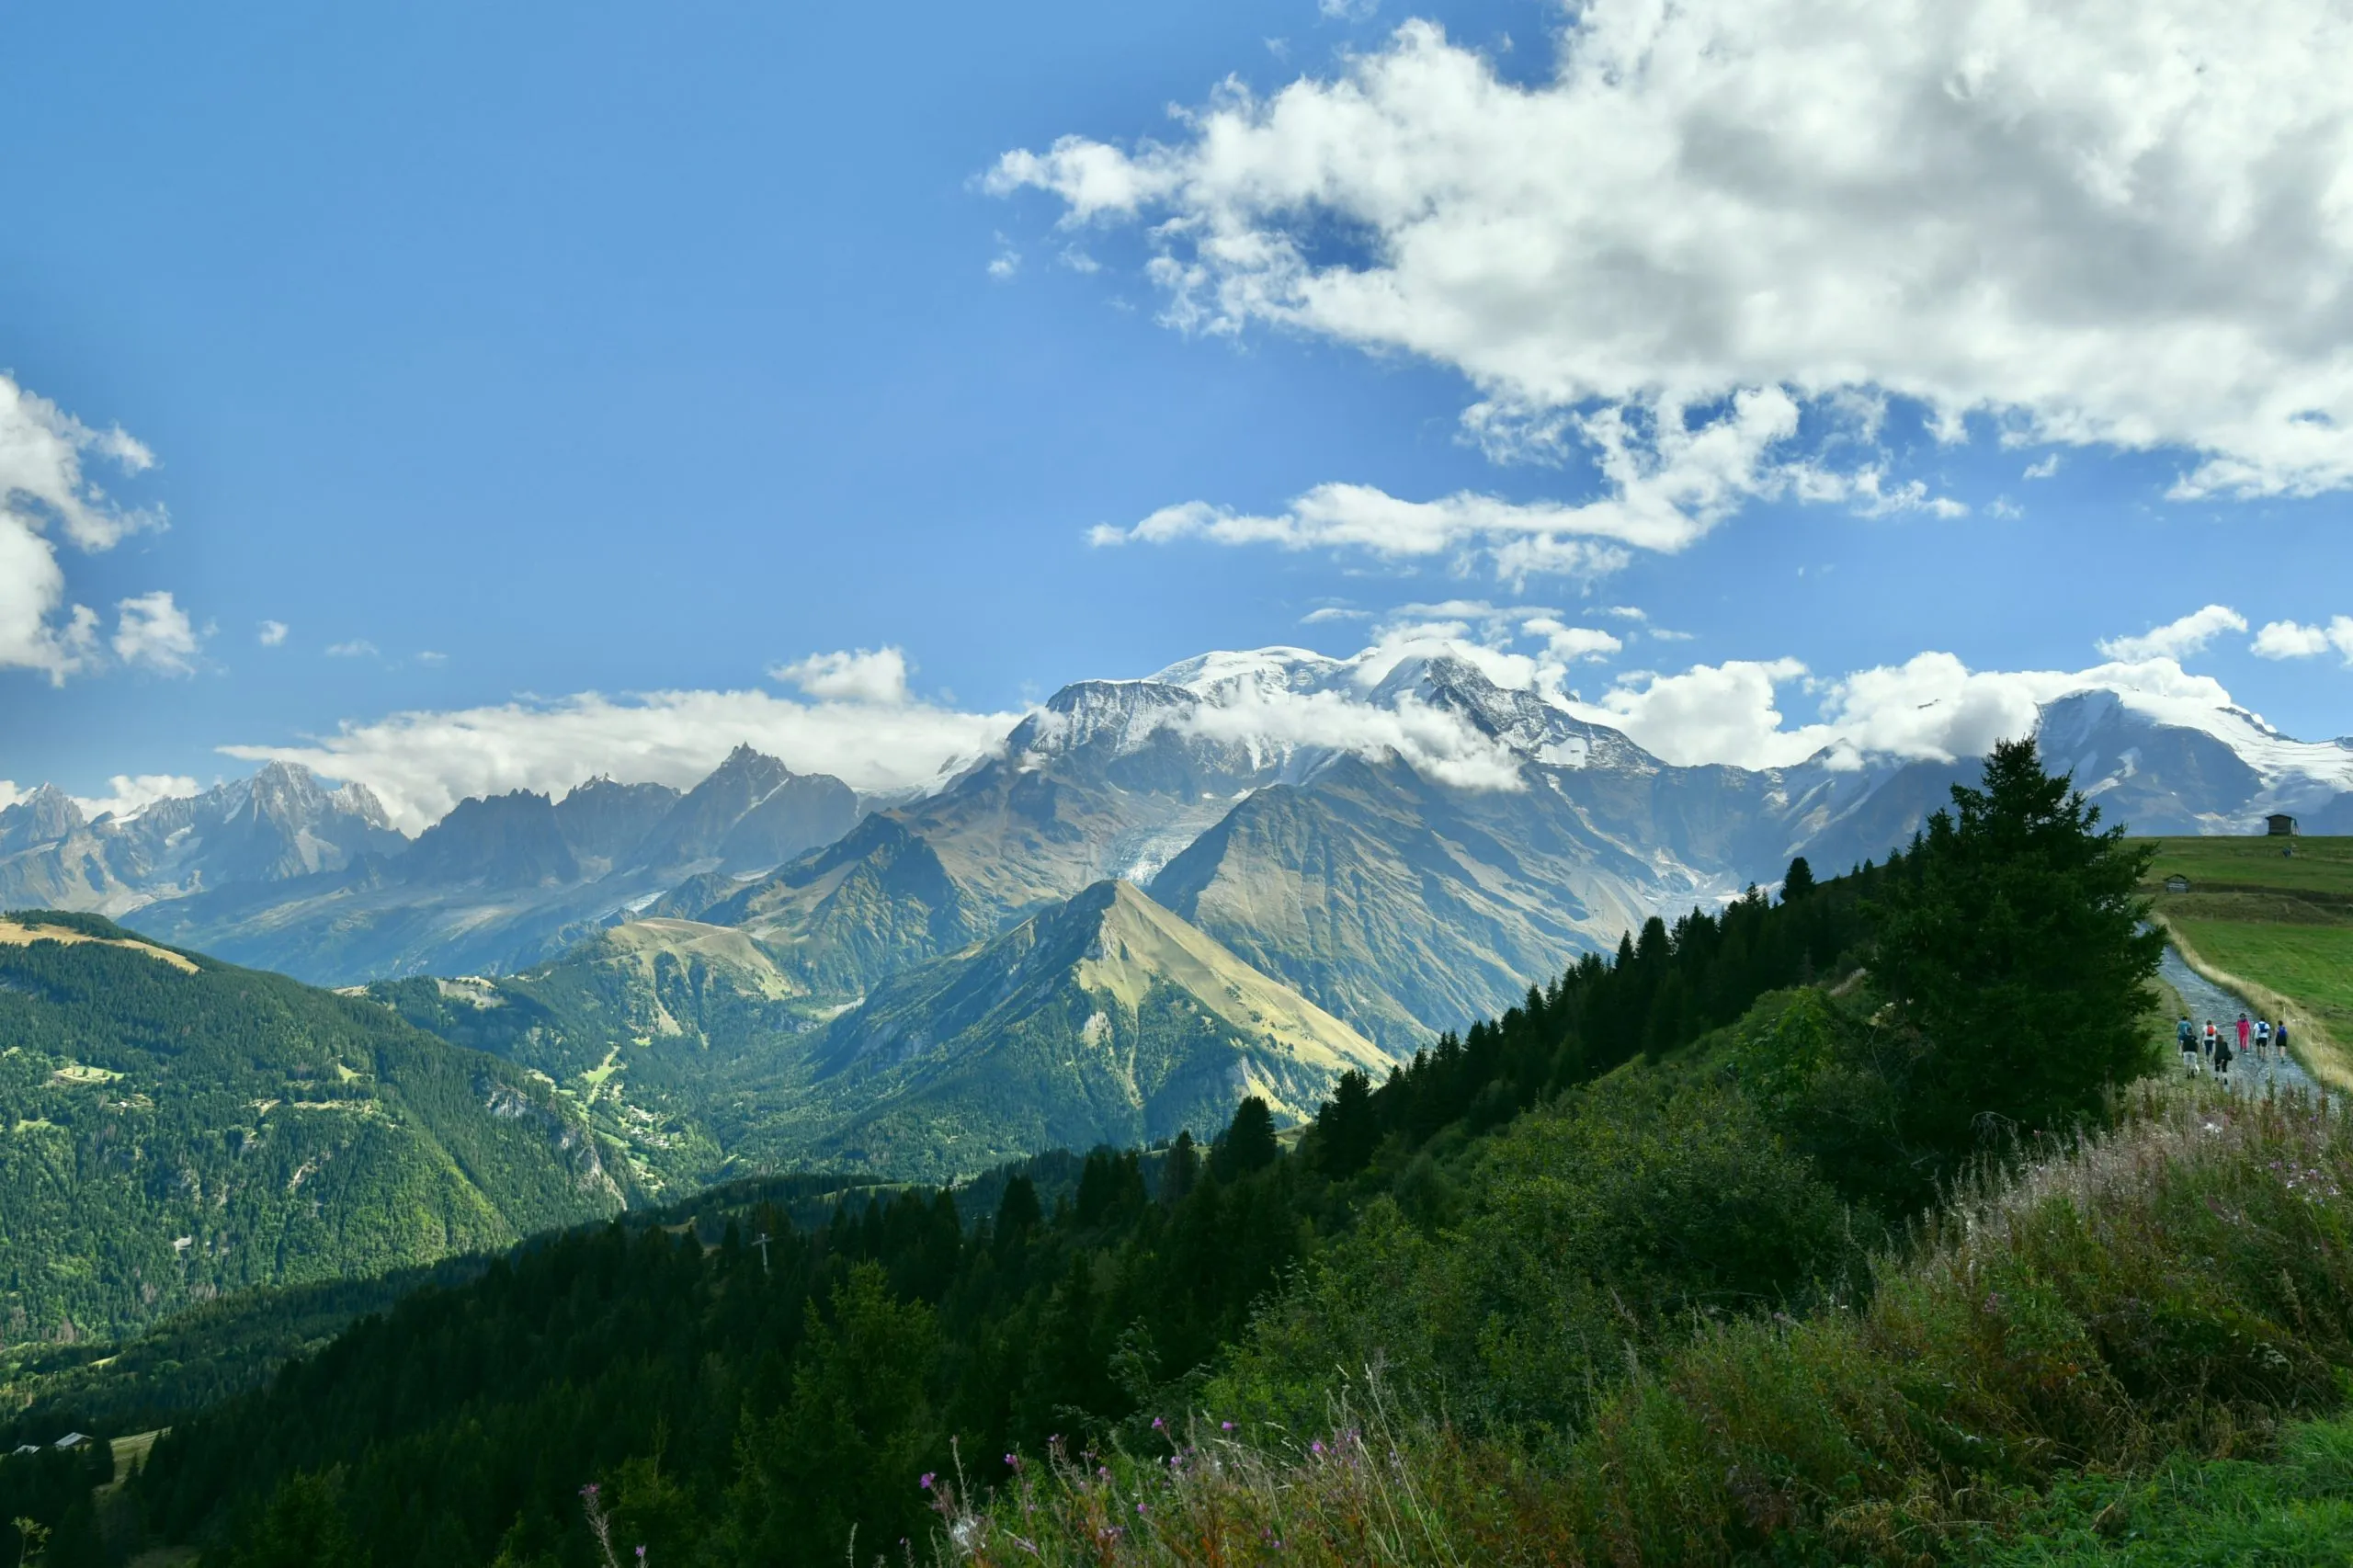 Magnificent panorama of the Mont Blanc Massif with in the foreground a hiking trail.